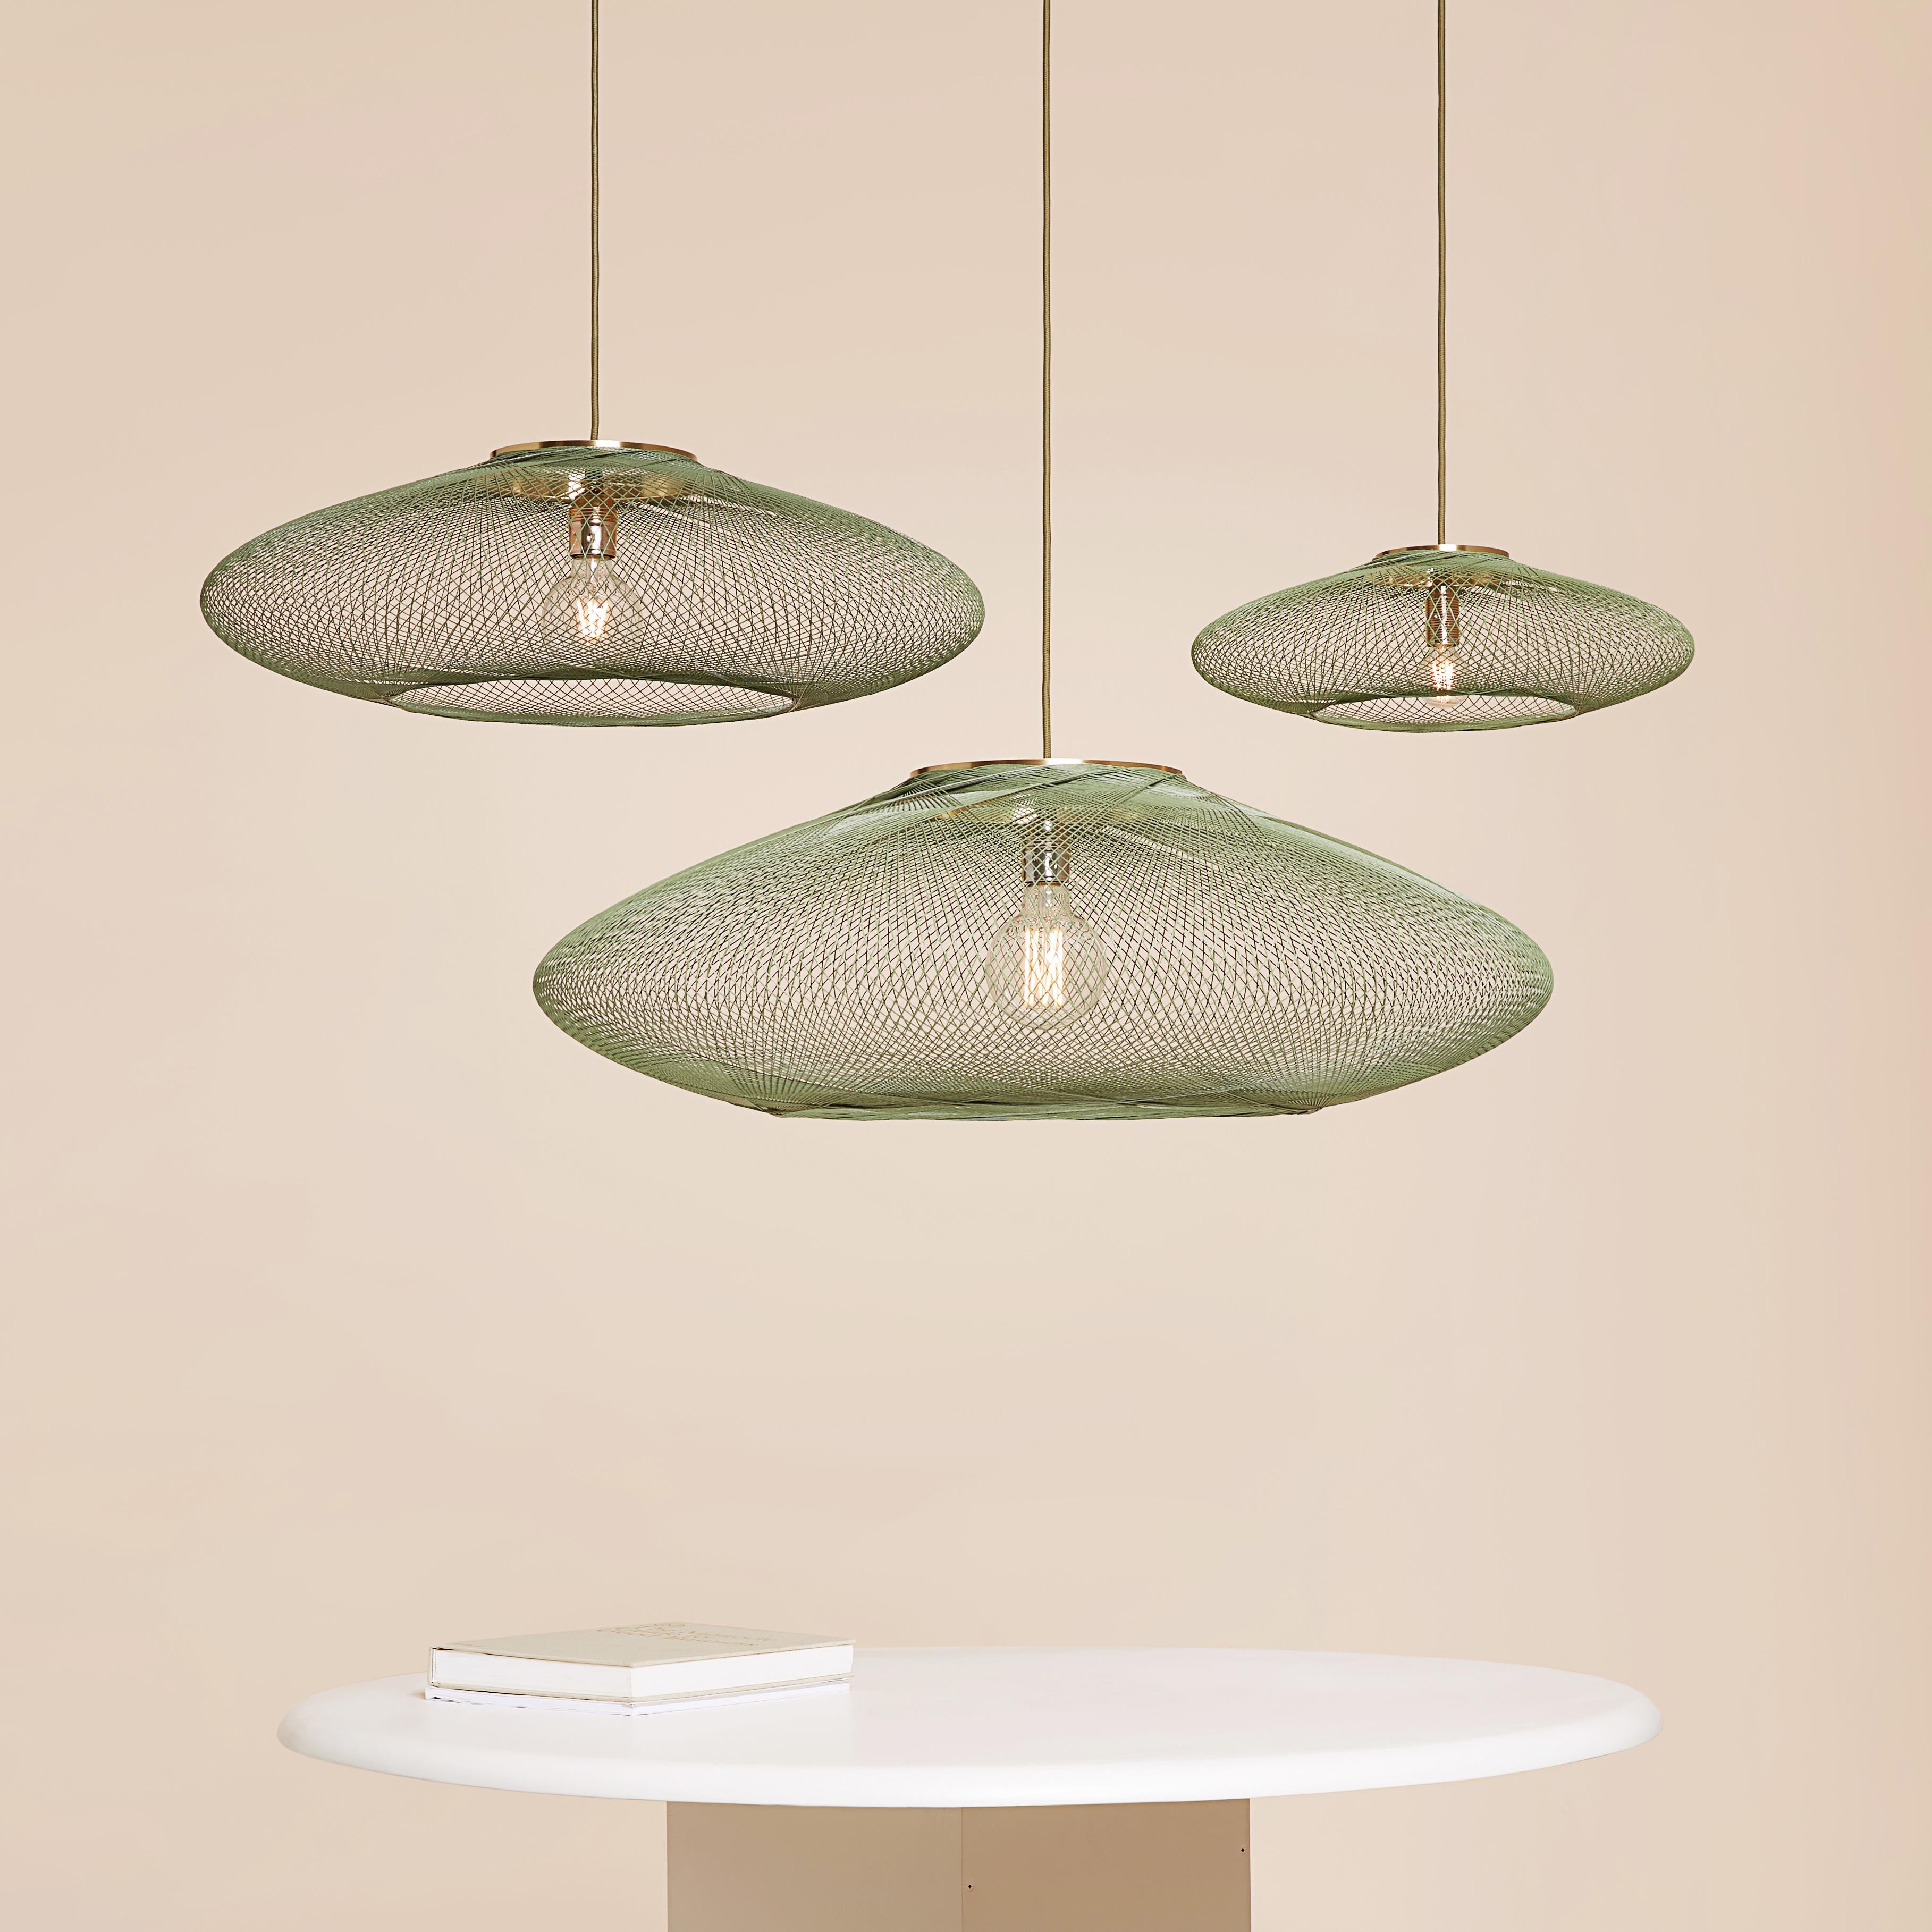 Small Moss green UFO pendant lamp by Atelier Robotiq
Dimensions: D 40 x H 12 cm
Materials: Resin-impregnated industrial fiber, brass.
Available with holder in brass/ black coated stainless steel.
Available in different colors, 3 sizes, and in